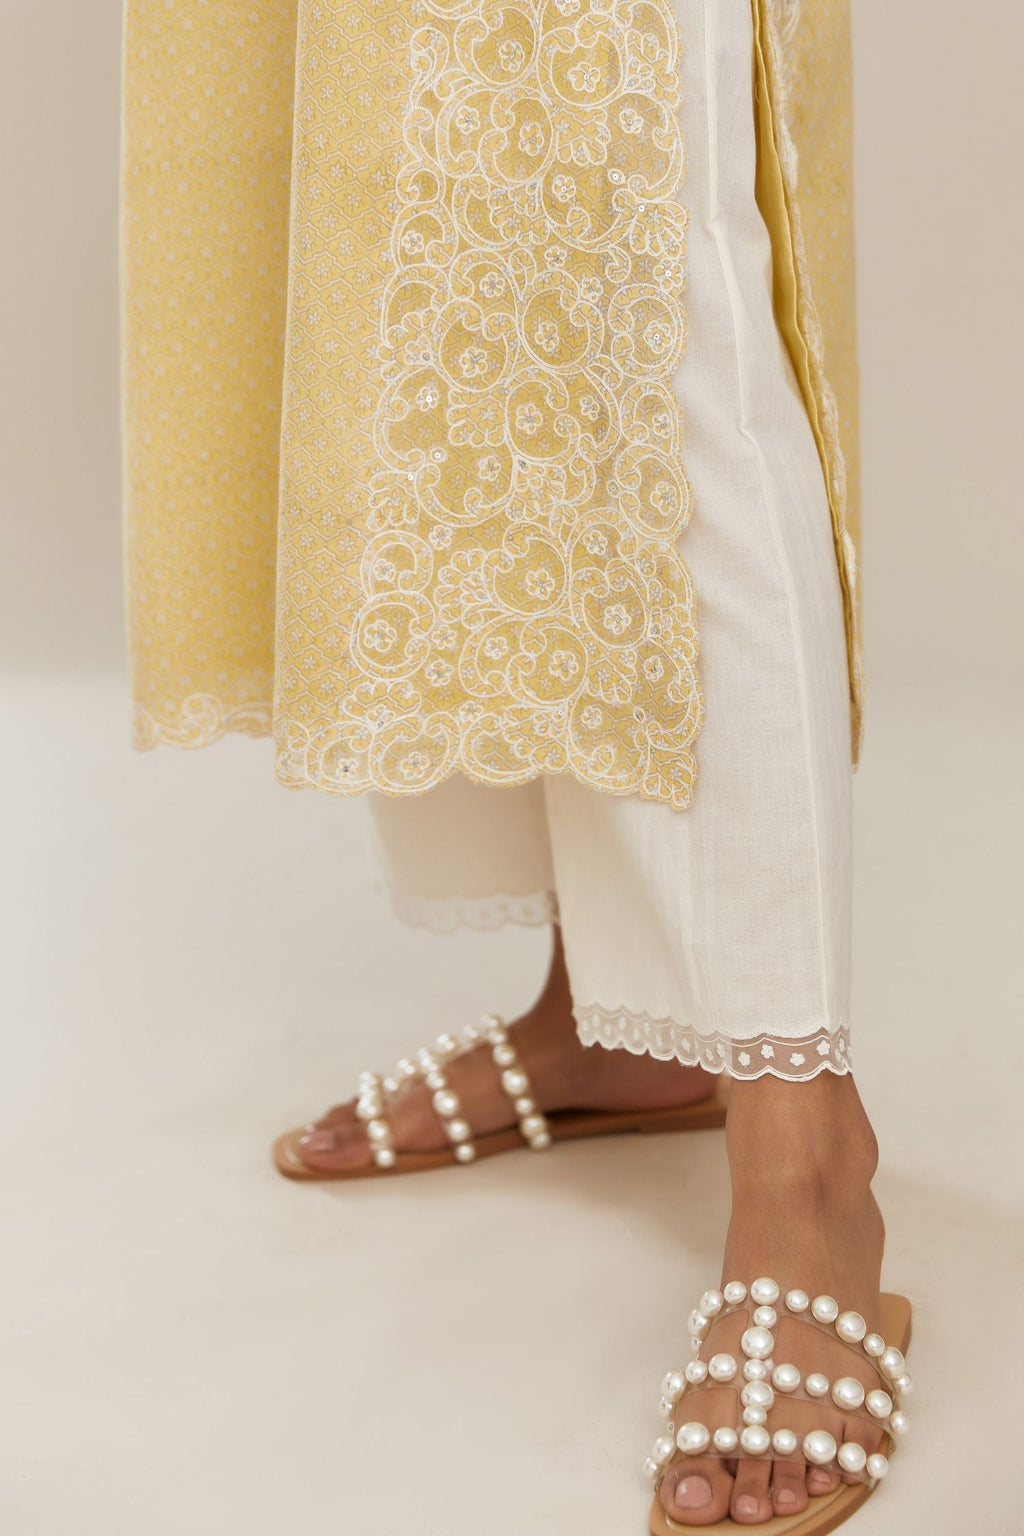 Yellow hand block over-printed cotton straight kurta set with cotton chanderi cutwork embroidery highlighted with sequins.